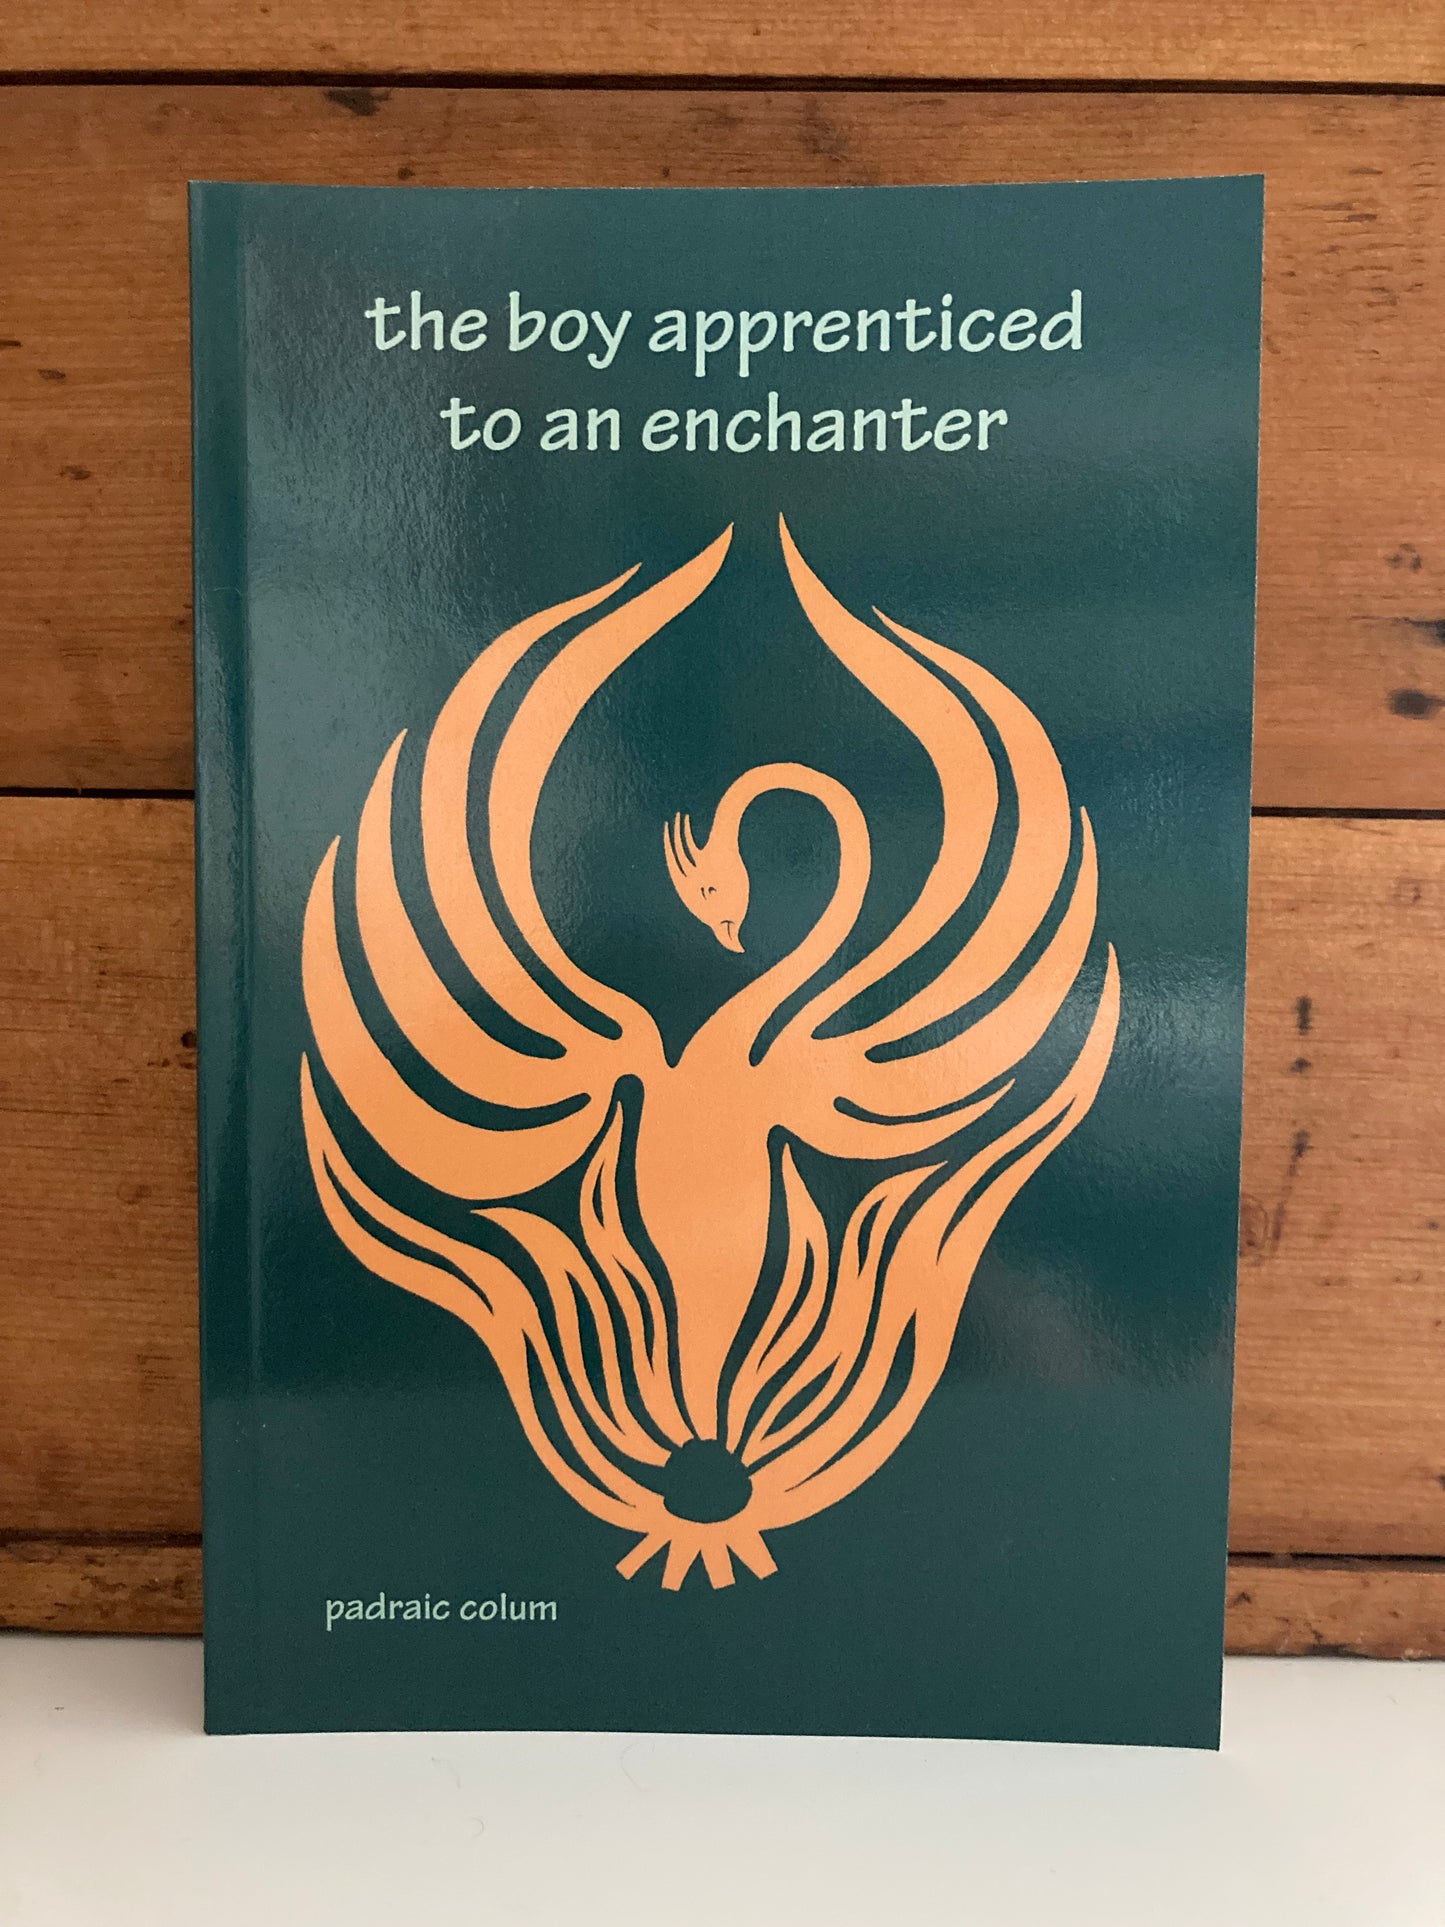 Chapter Books for Older Readers - THE BOY APPRENTICED TO AN ENCHANTER